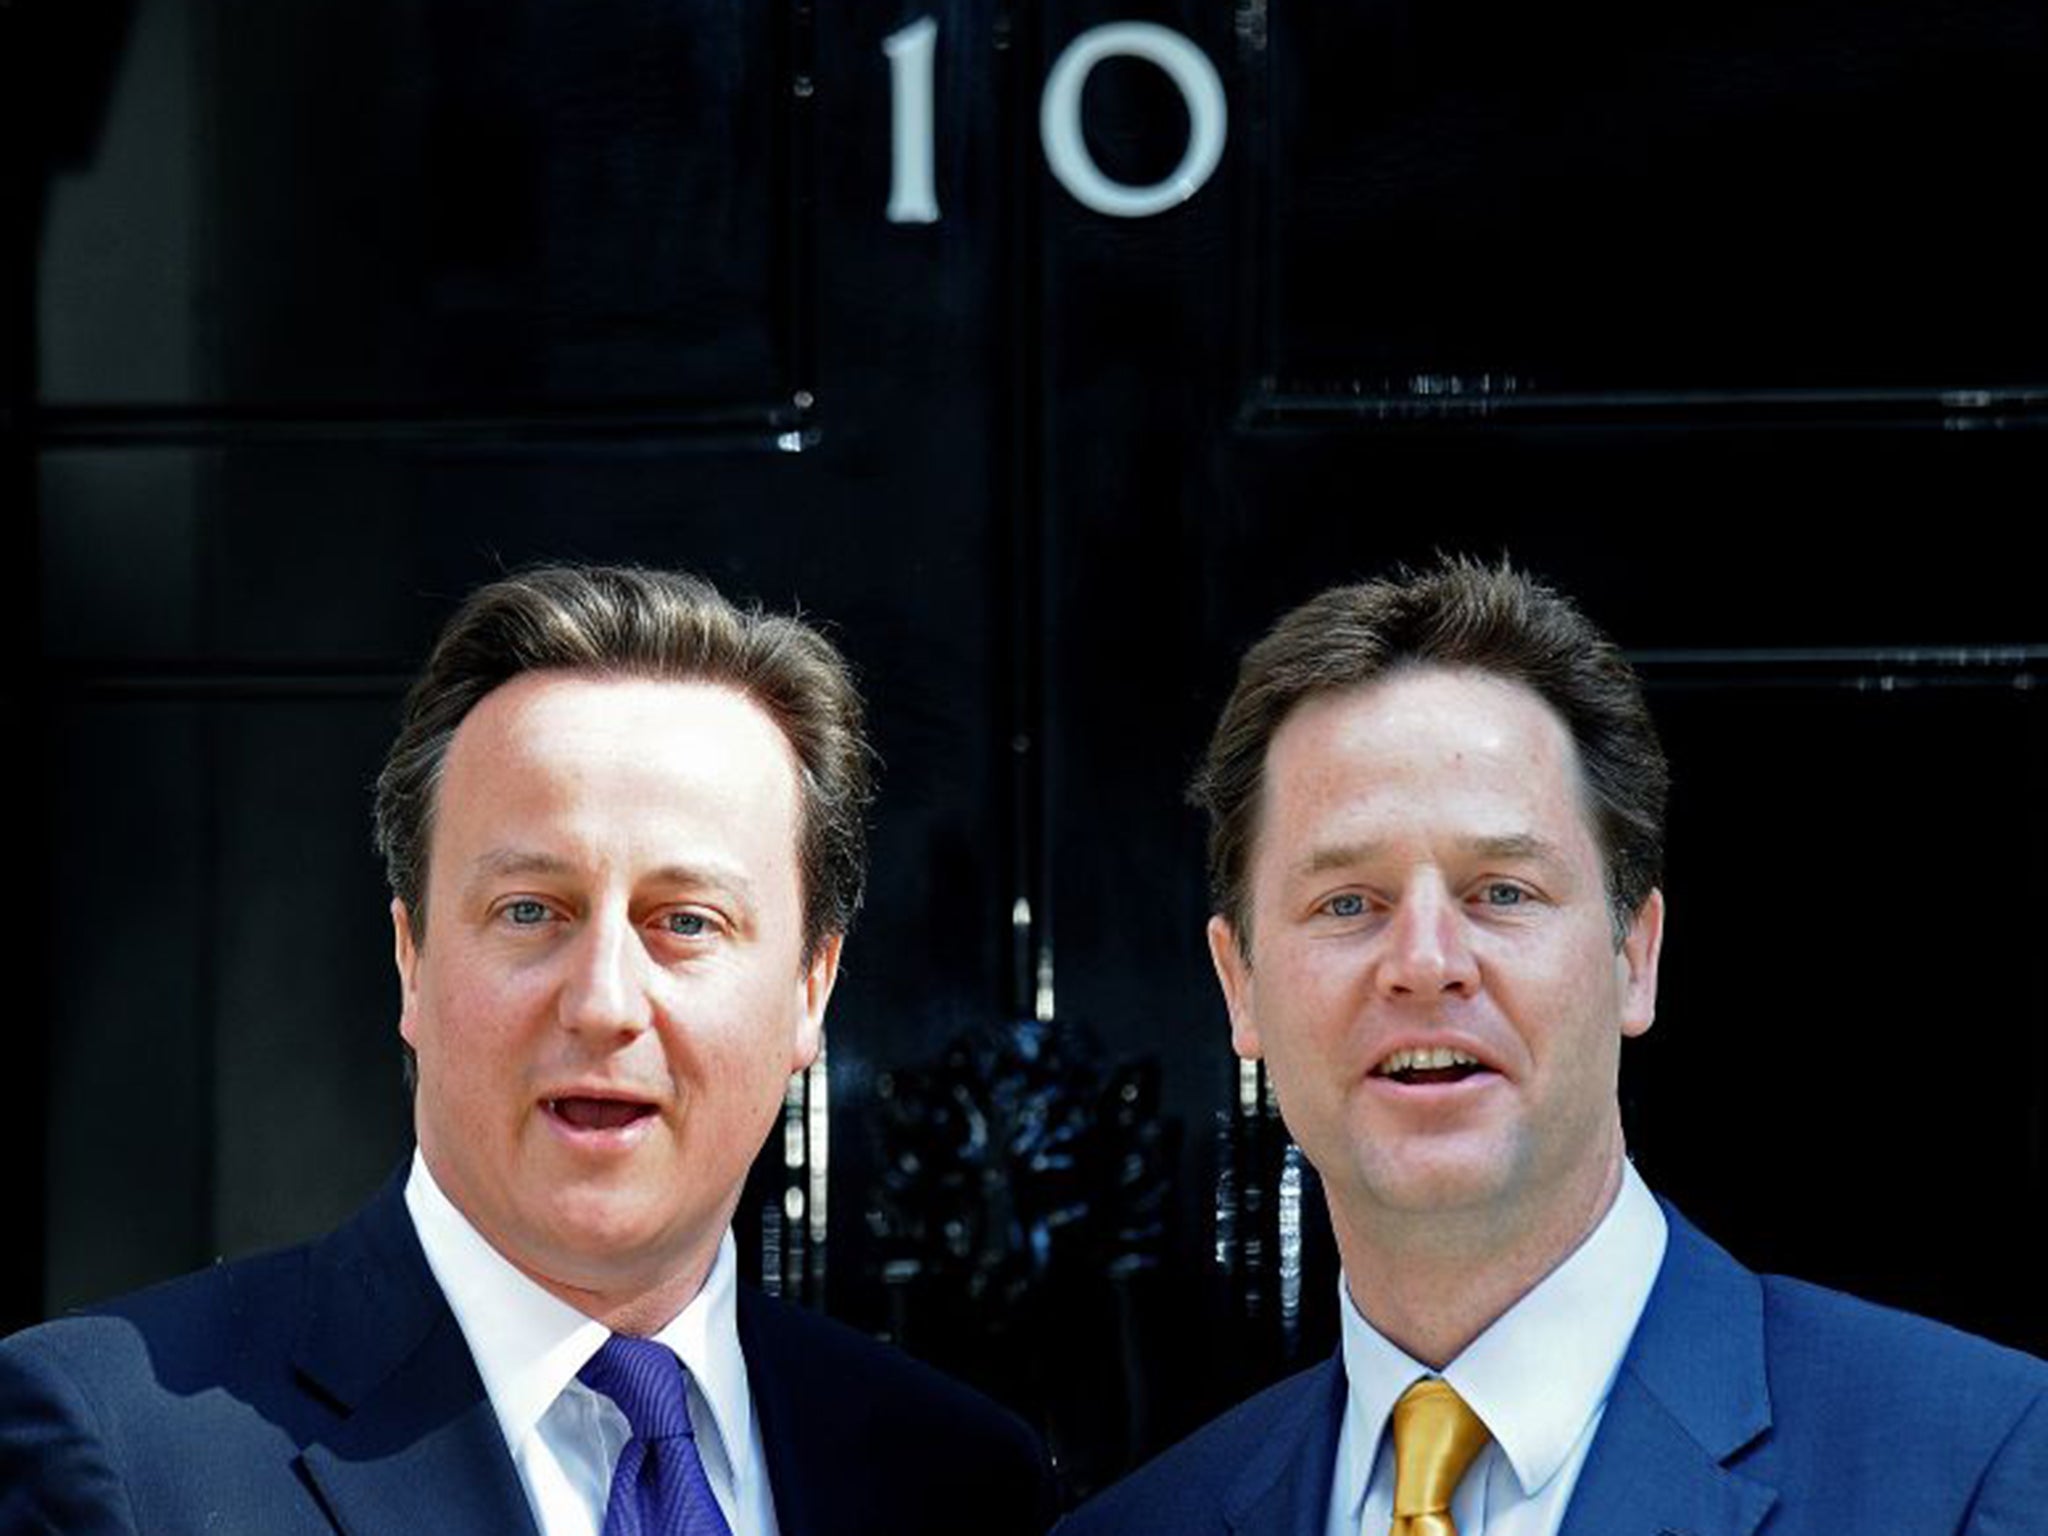 Deal sealed: David Cameron and Nick Clegg on the steps of No 10 on 12 May 2010